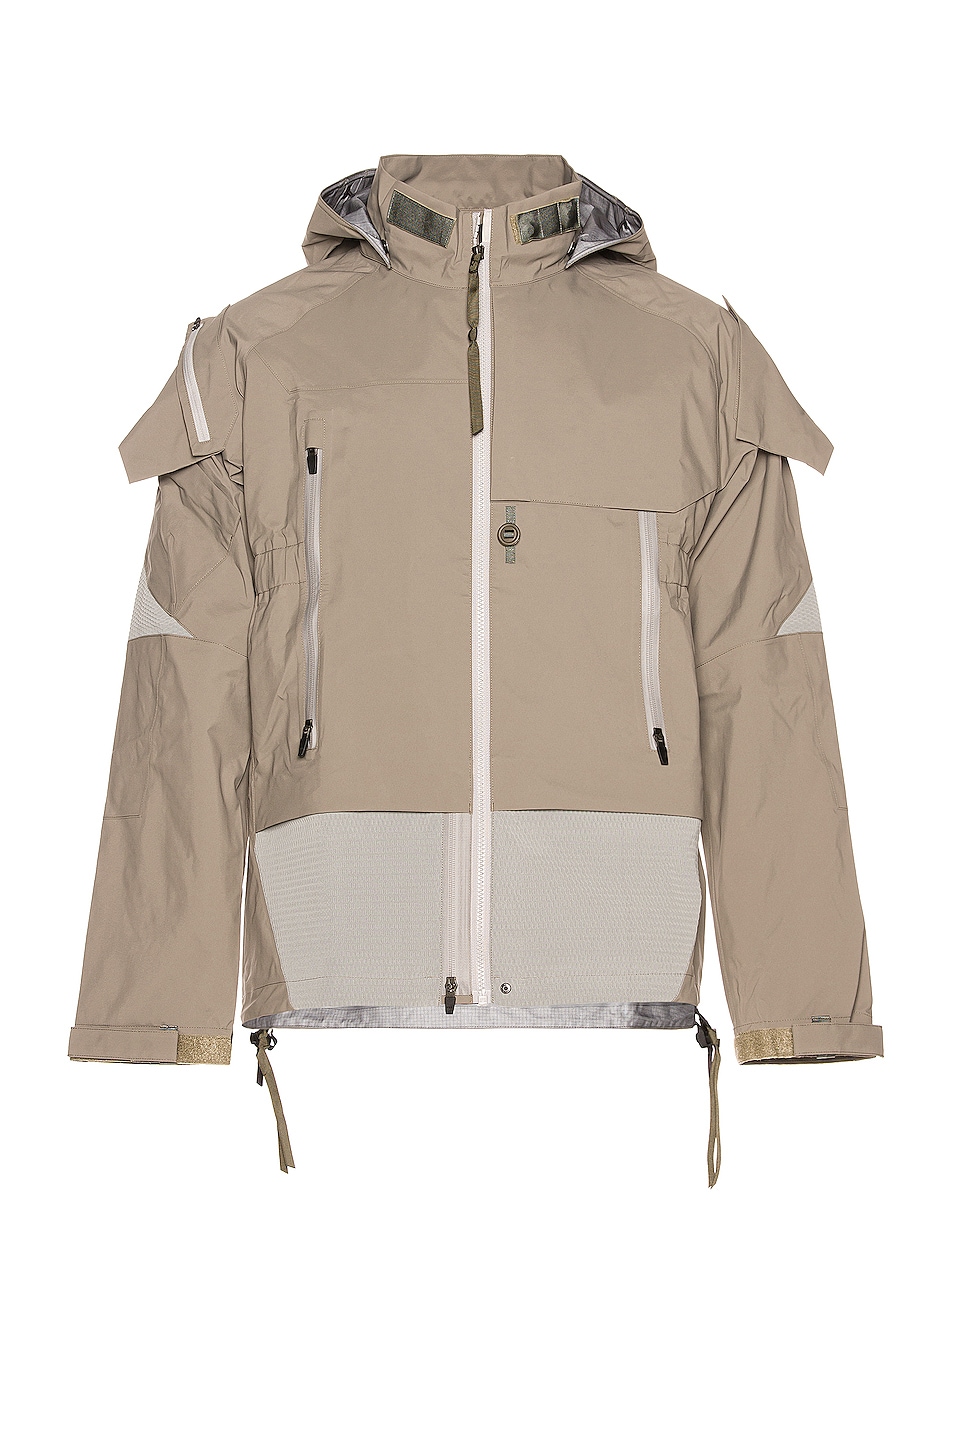 Image 1 of Acronym J16-GT 3L Gore-Tex Pro Jacket in Alpha Green